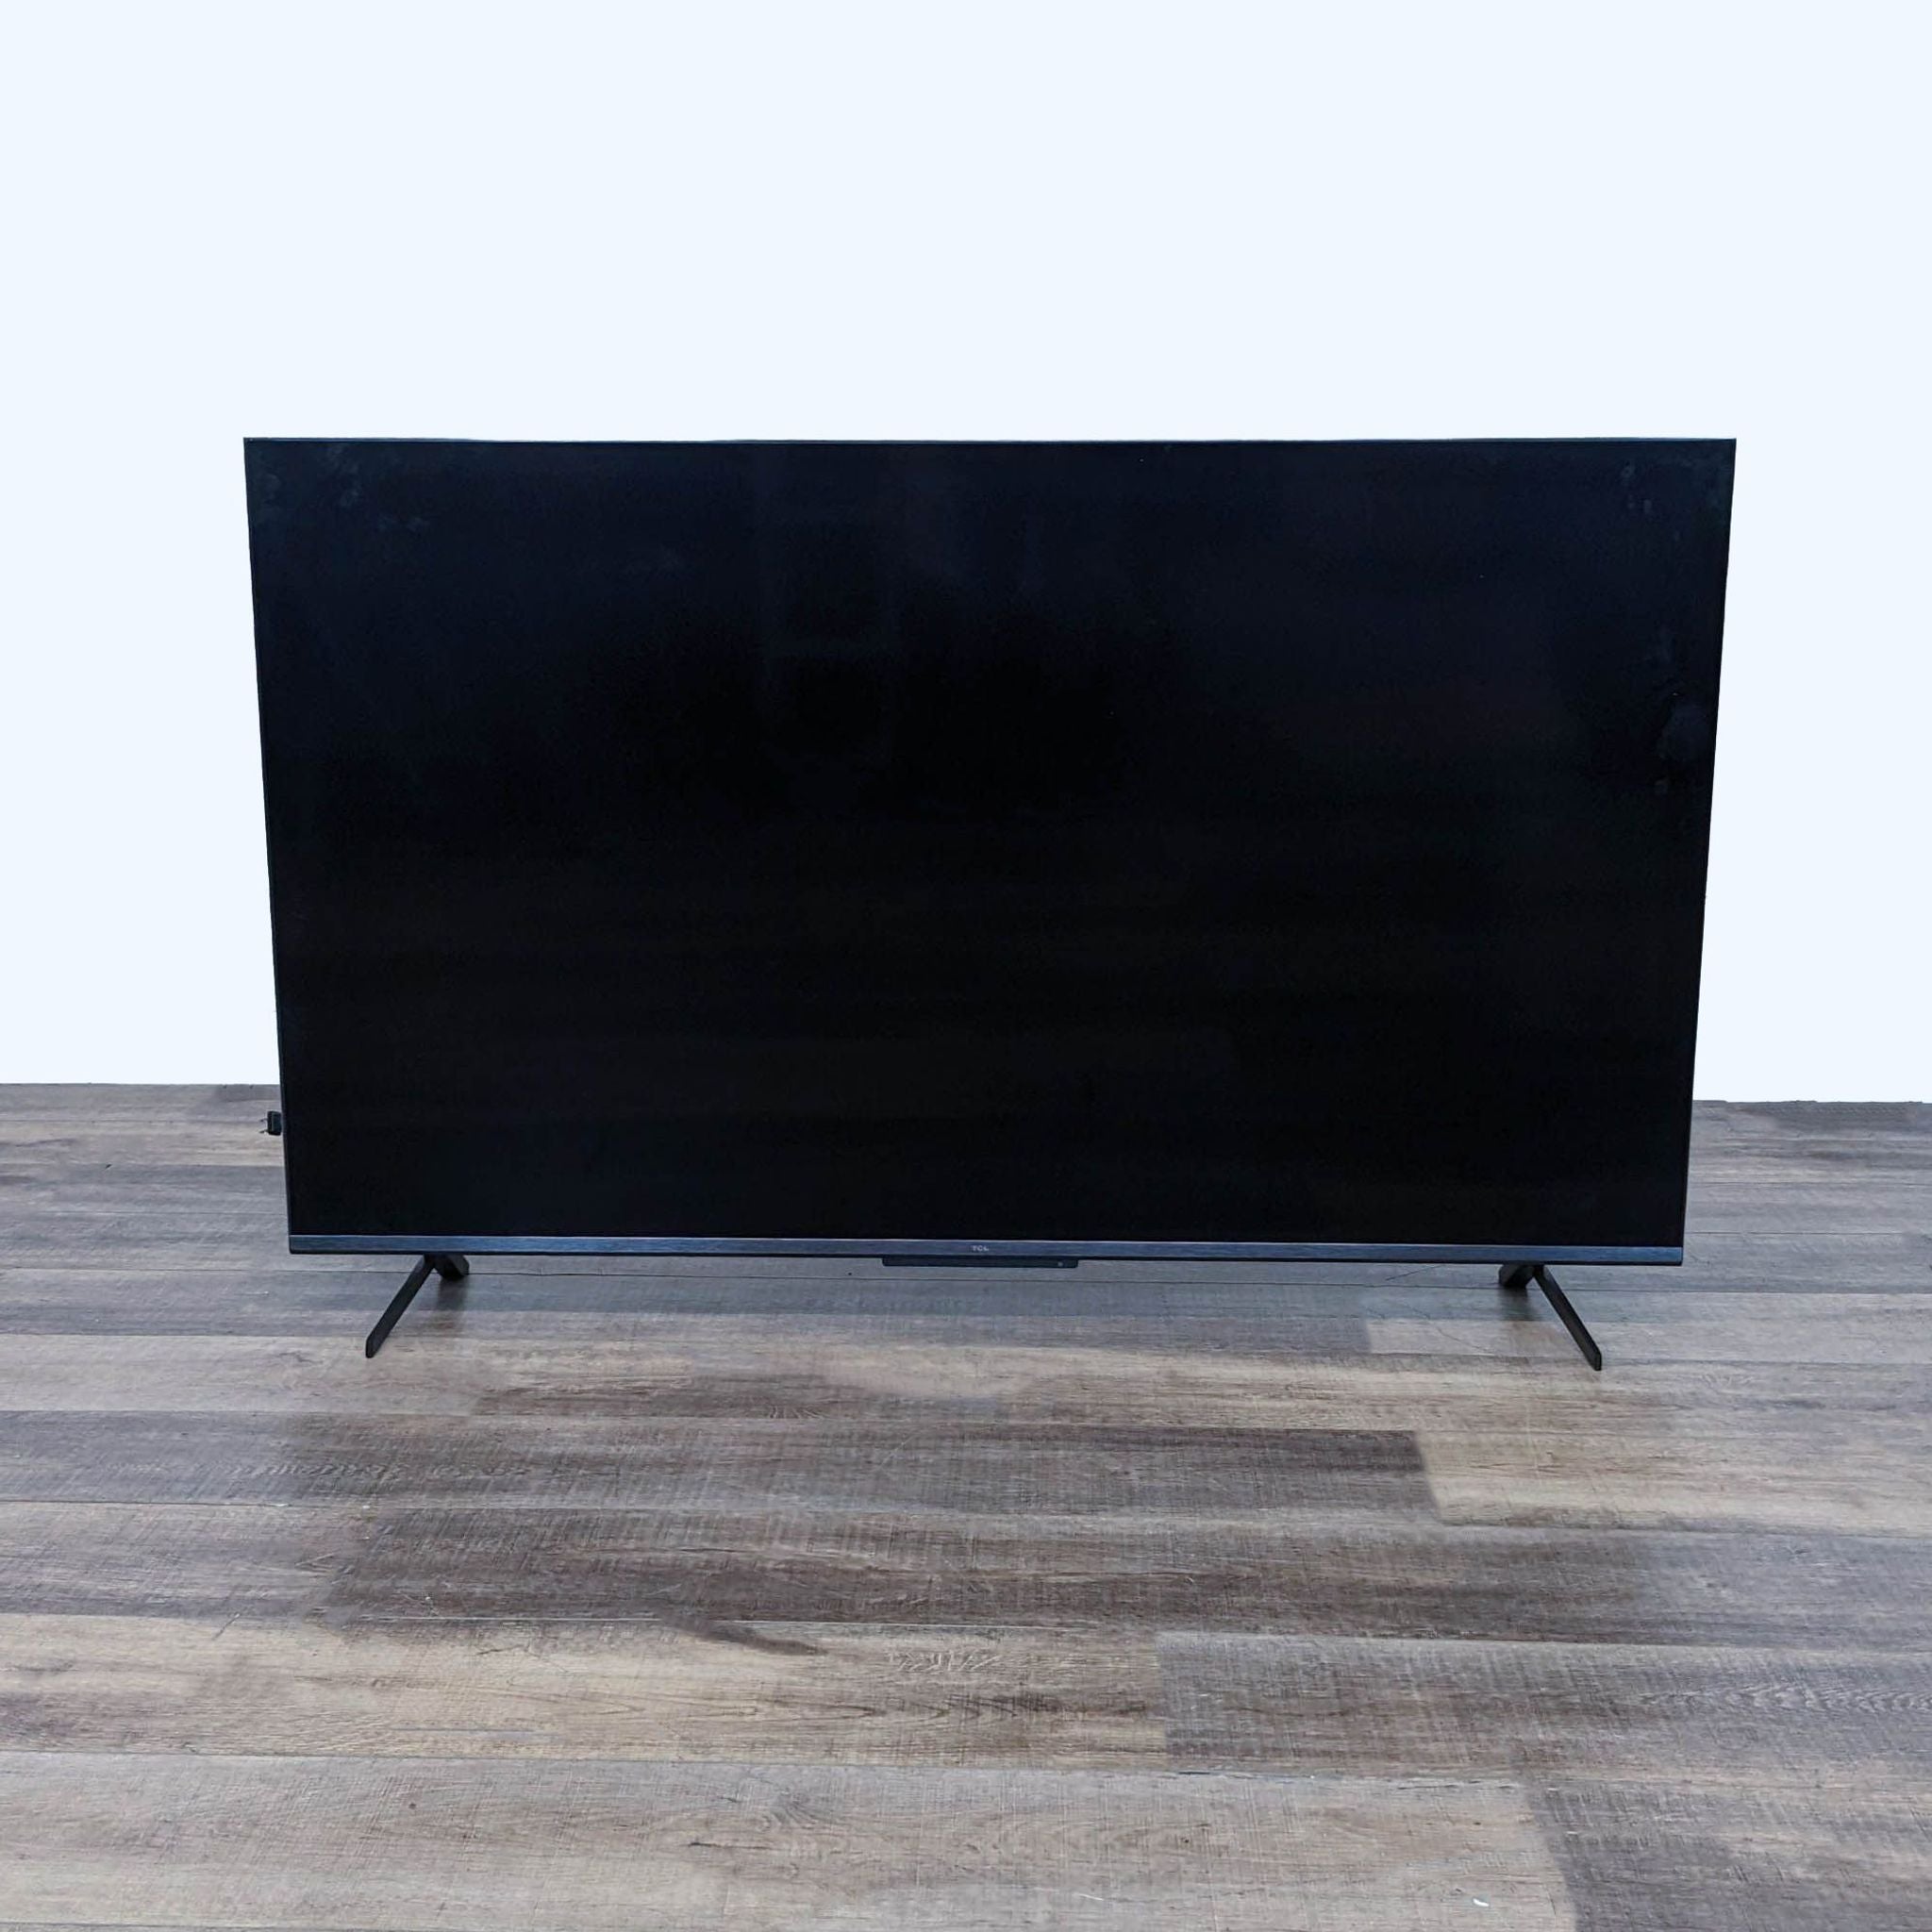 TCL Full HD Smart TV turned off, showcasing a sleek design and simple stands on a wooden floor.